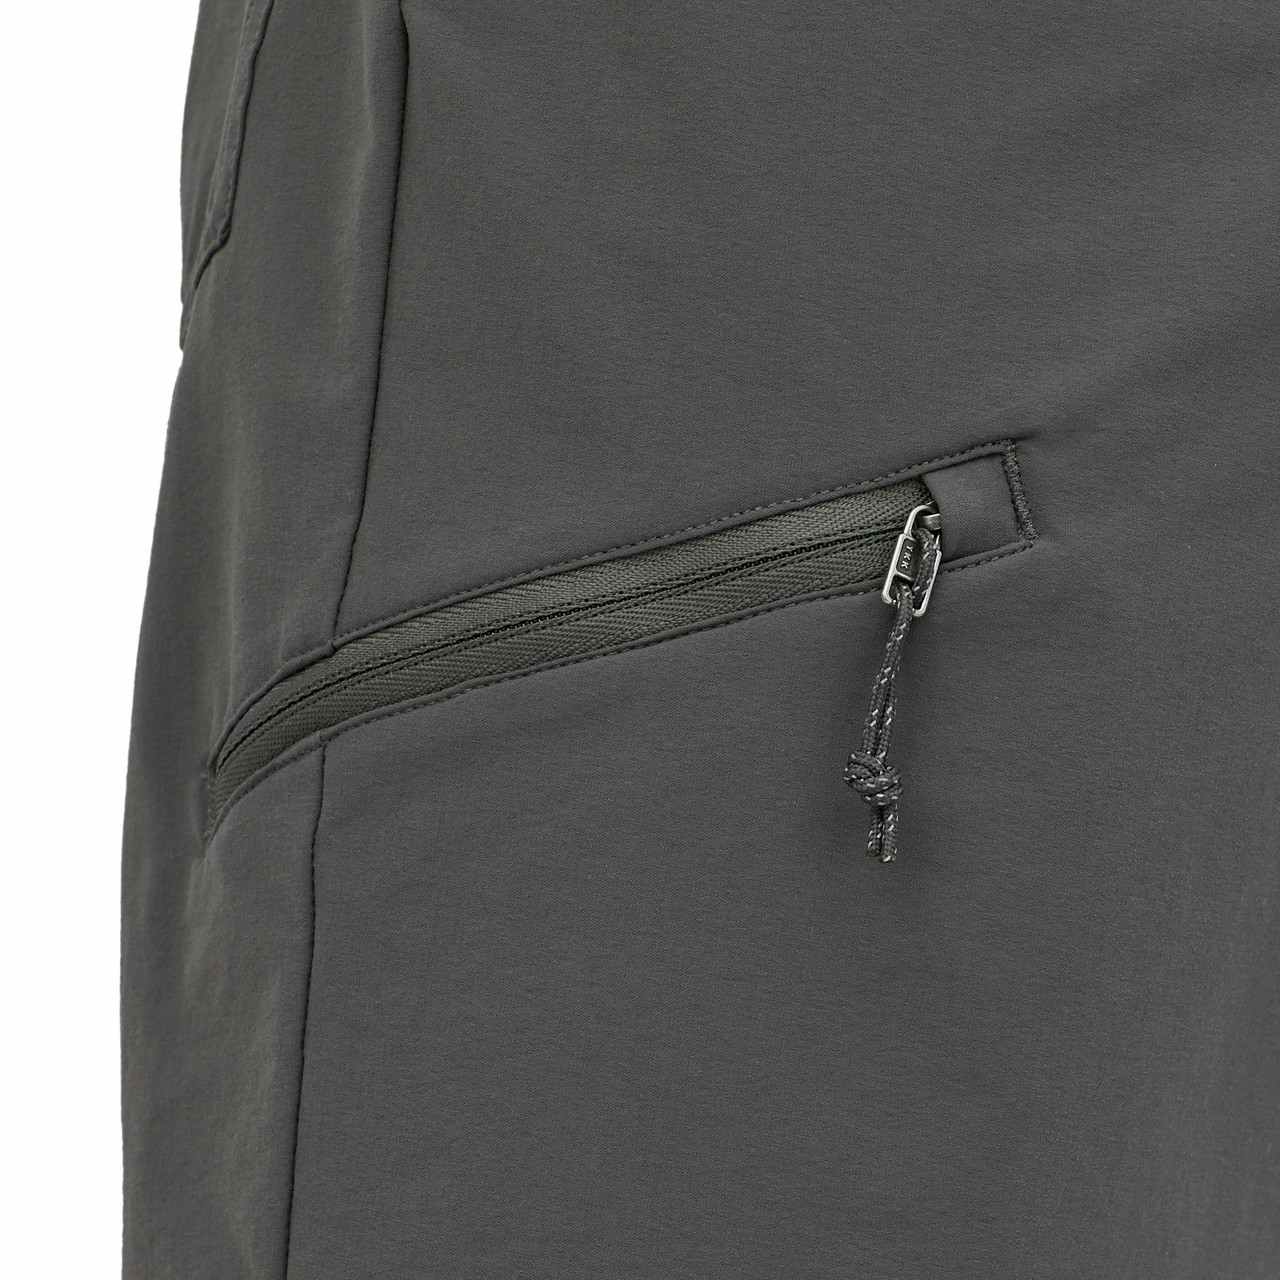 Quandary 10" Shorts Forge Grey